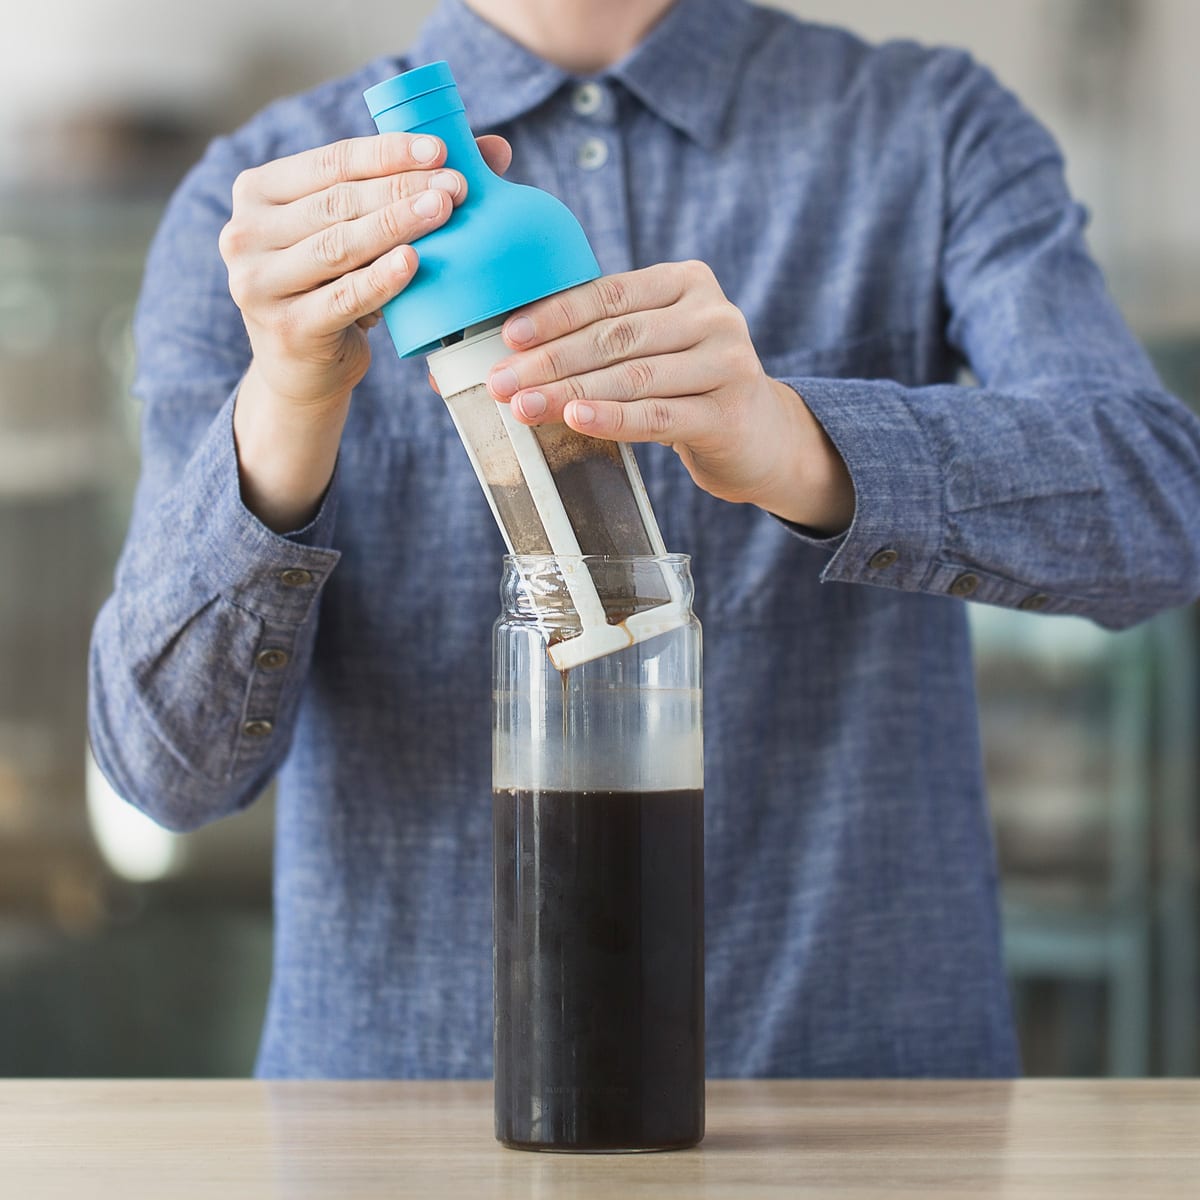 Filter being removed from a cold brew bottle.